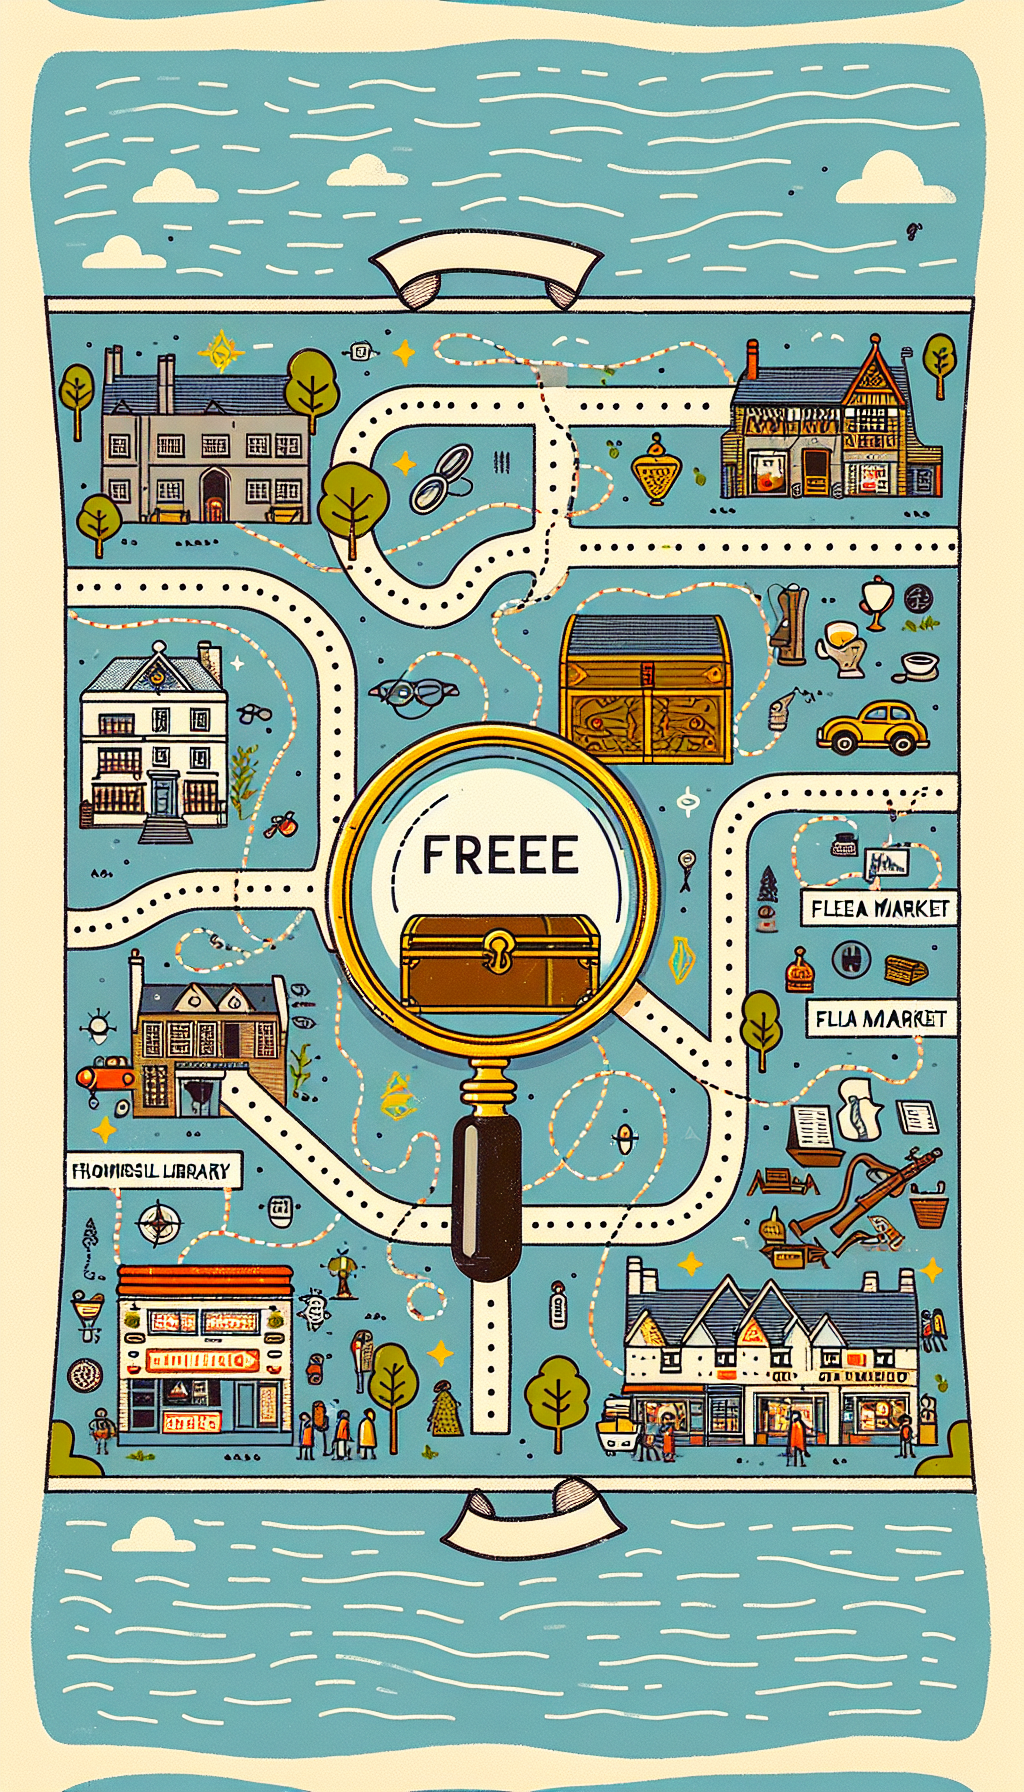 A whimsical treasure map unfolds across the illustration, dotted with various iconic local landmarks where complimentary antique appraisals are offered—a library, a cozy café, a bustling flea market, and a serene park. An antique magnifying glass highlights these venues, and a dotted line leads to a gleaming, oversized "FREE" sign that beckons like a treasure chest.